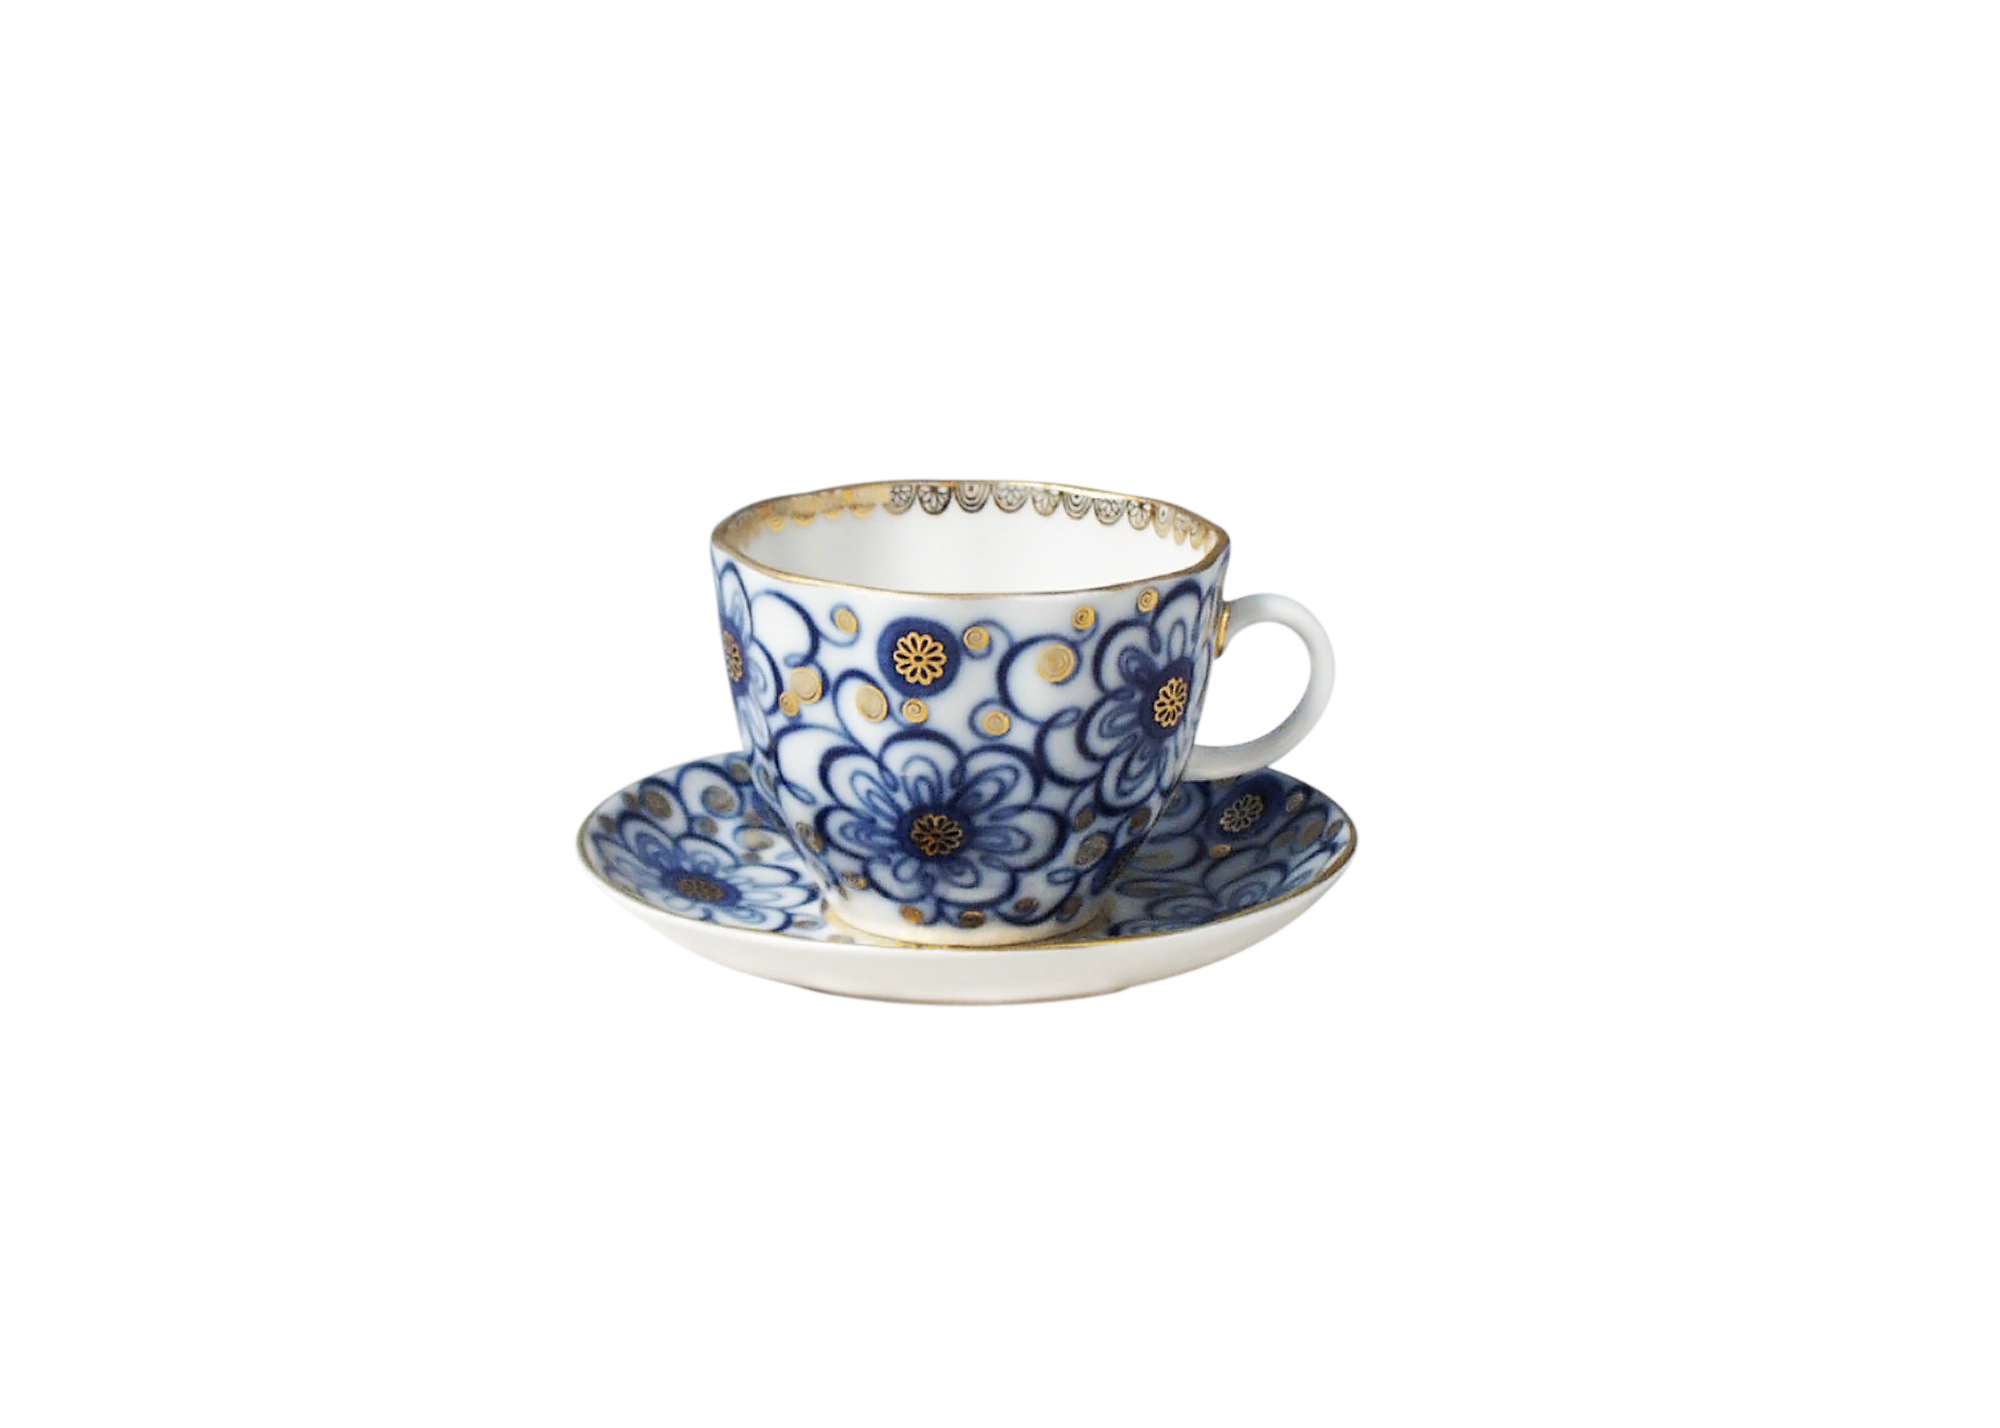 Buy Winding Twig Coffee Cup and Saucer at GoldenCockerel.com